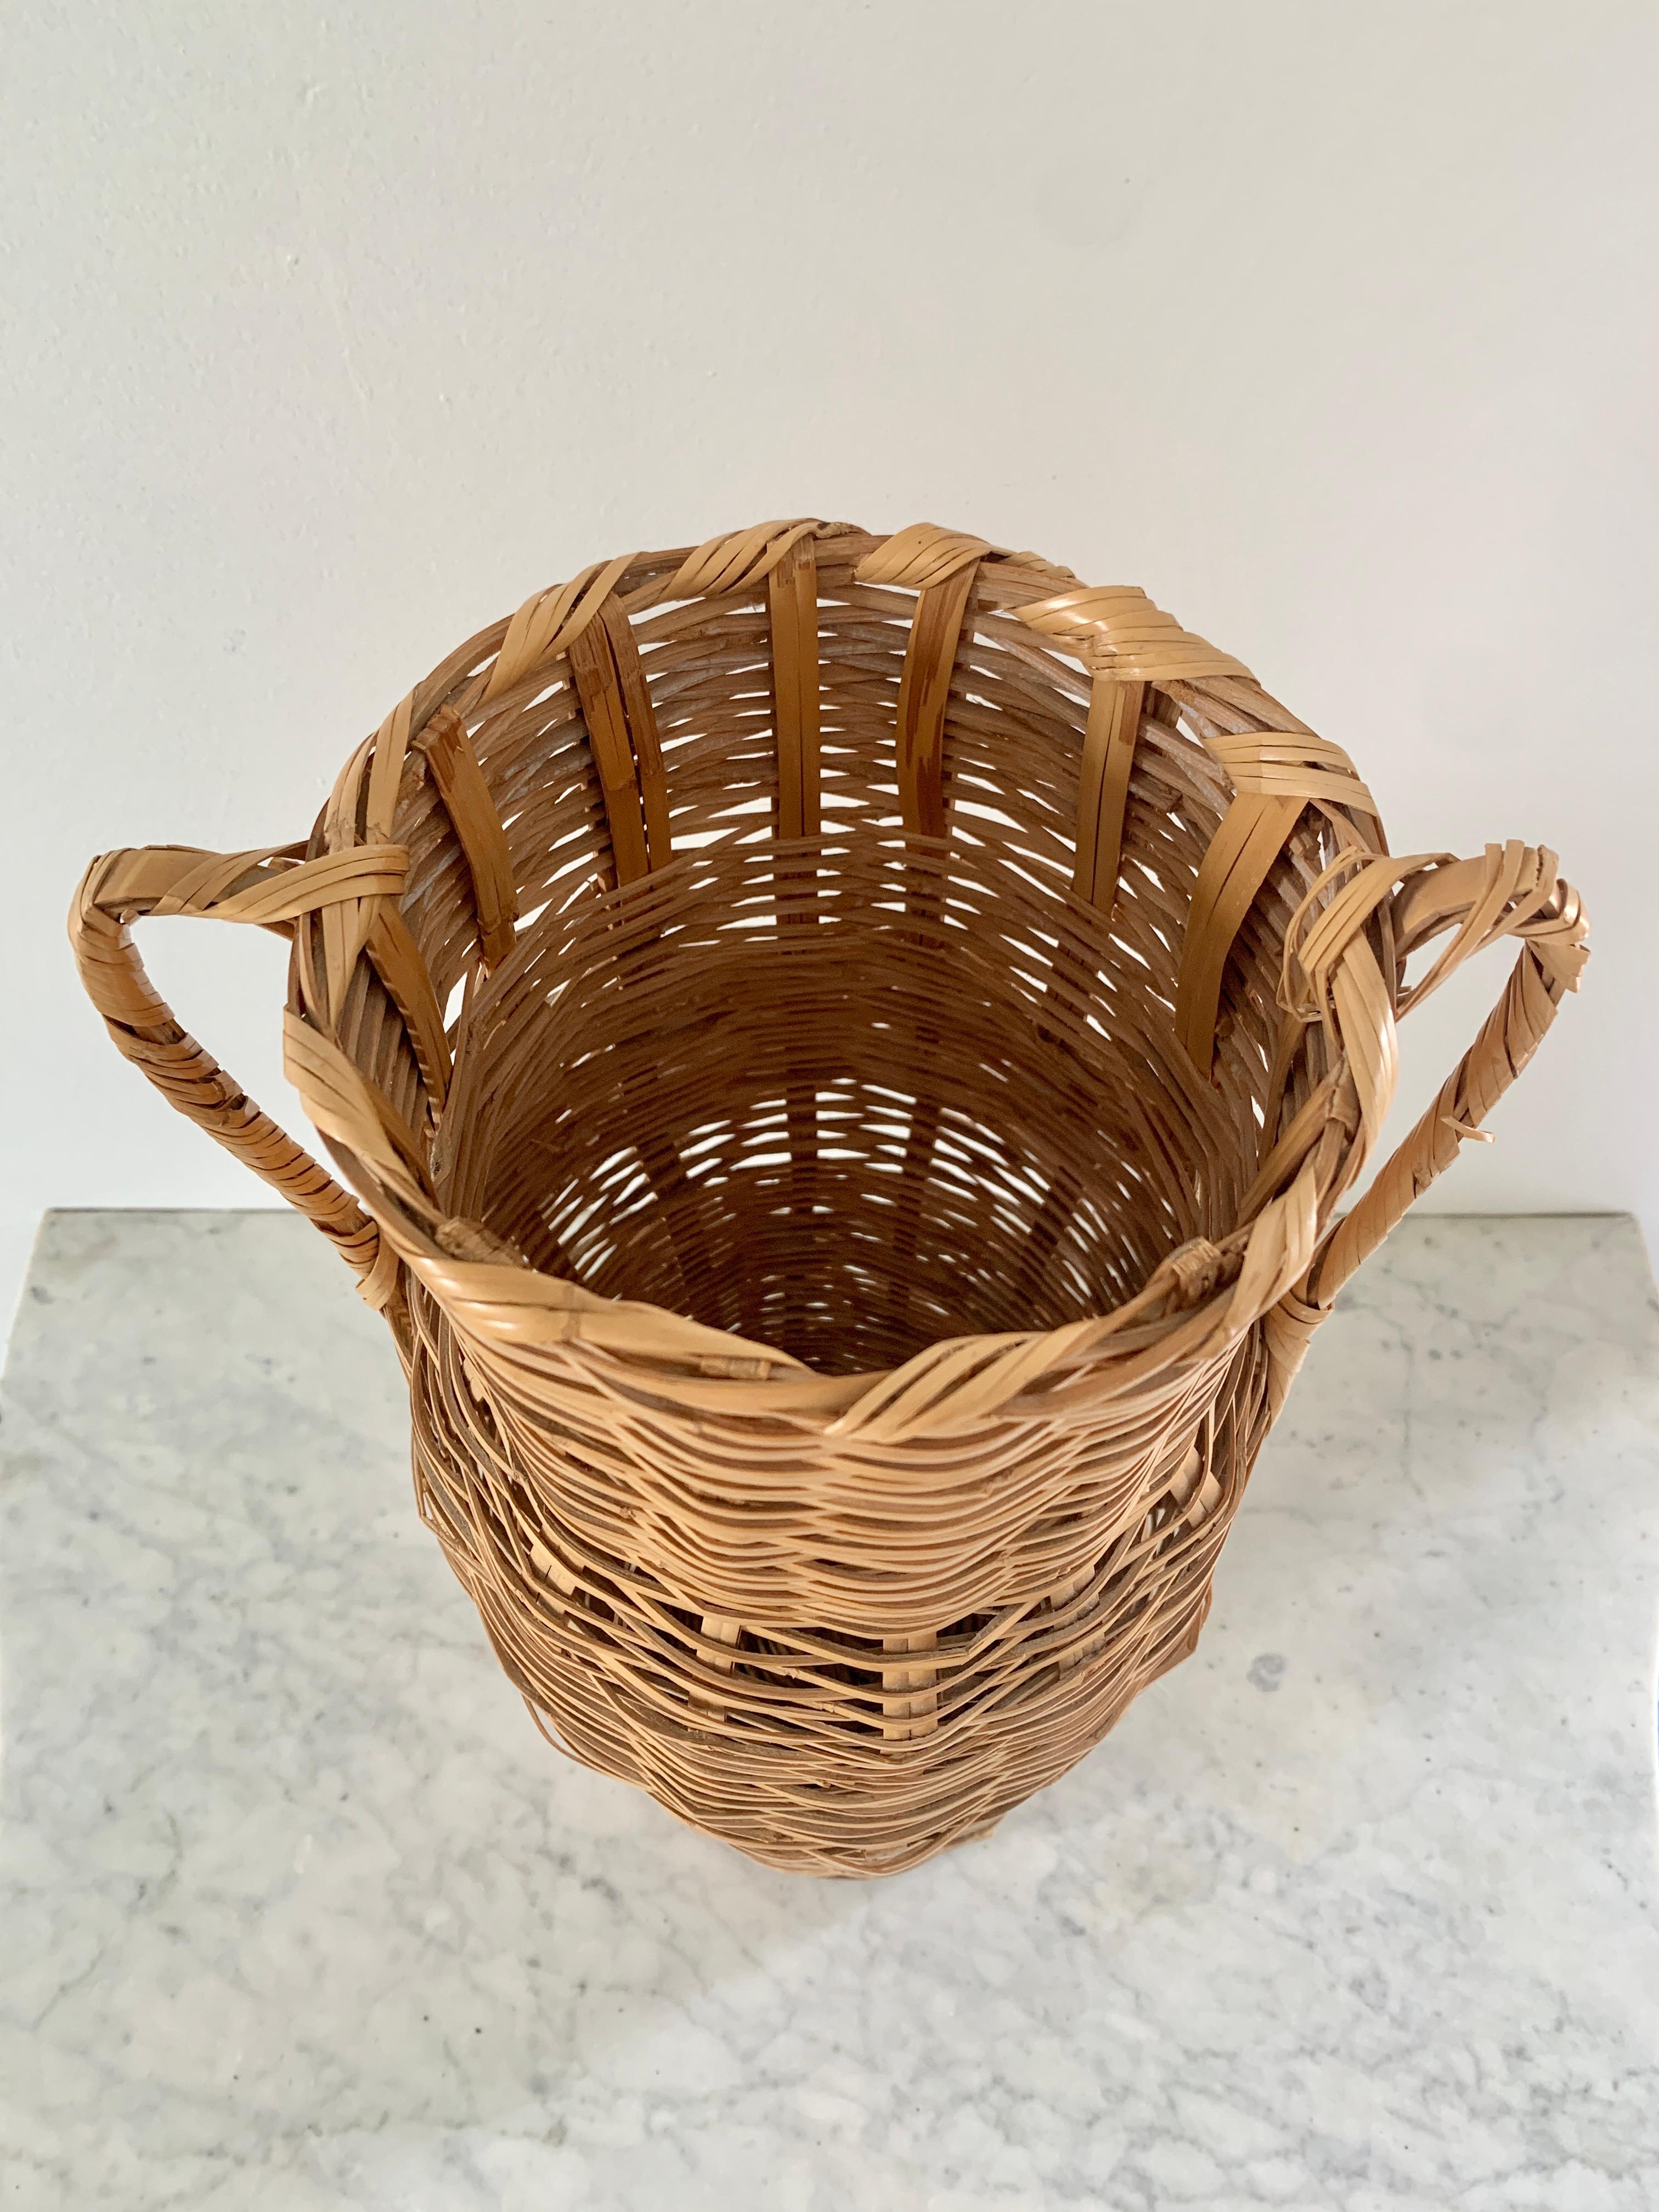 A charming Boho Chic woven wicker basket in the form of an Amphora vase

USA, circa 1980s

Measures: 10